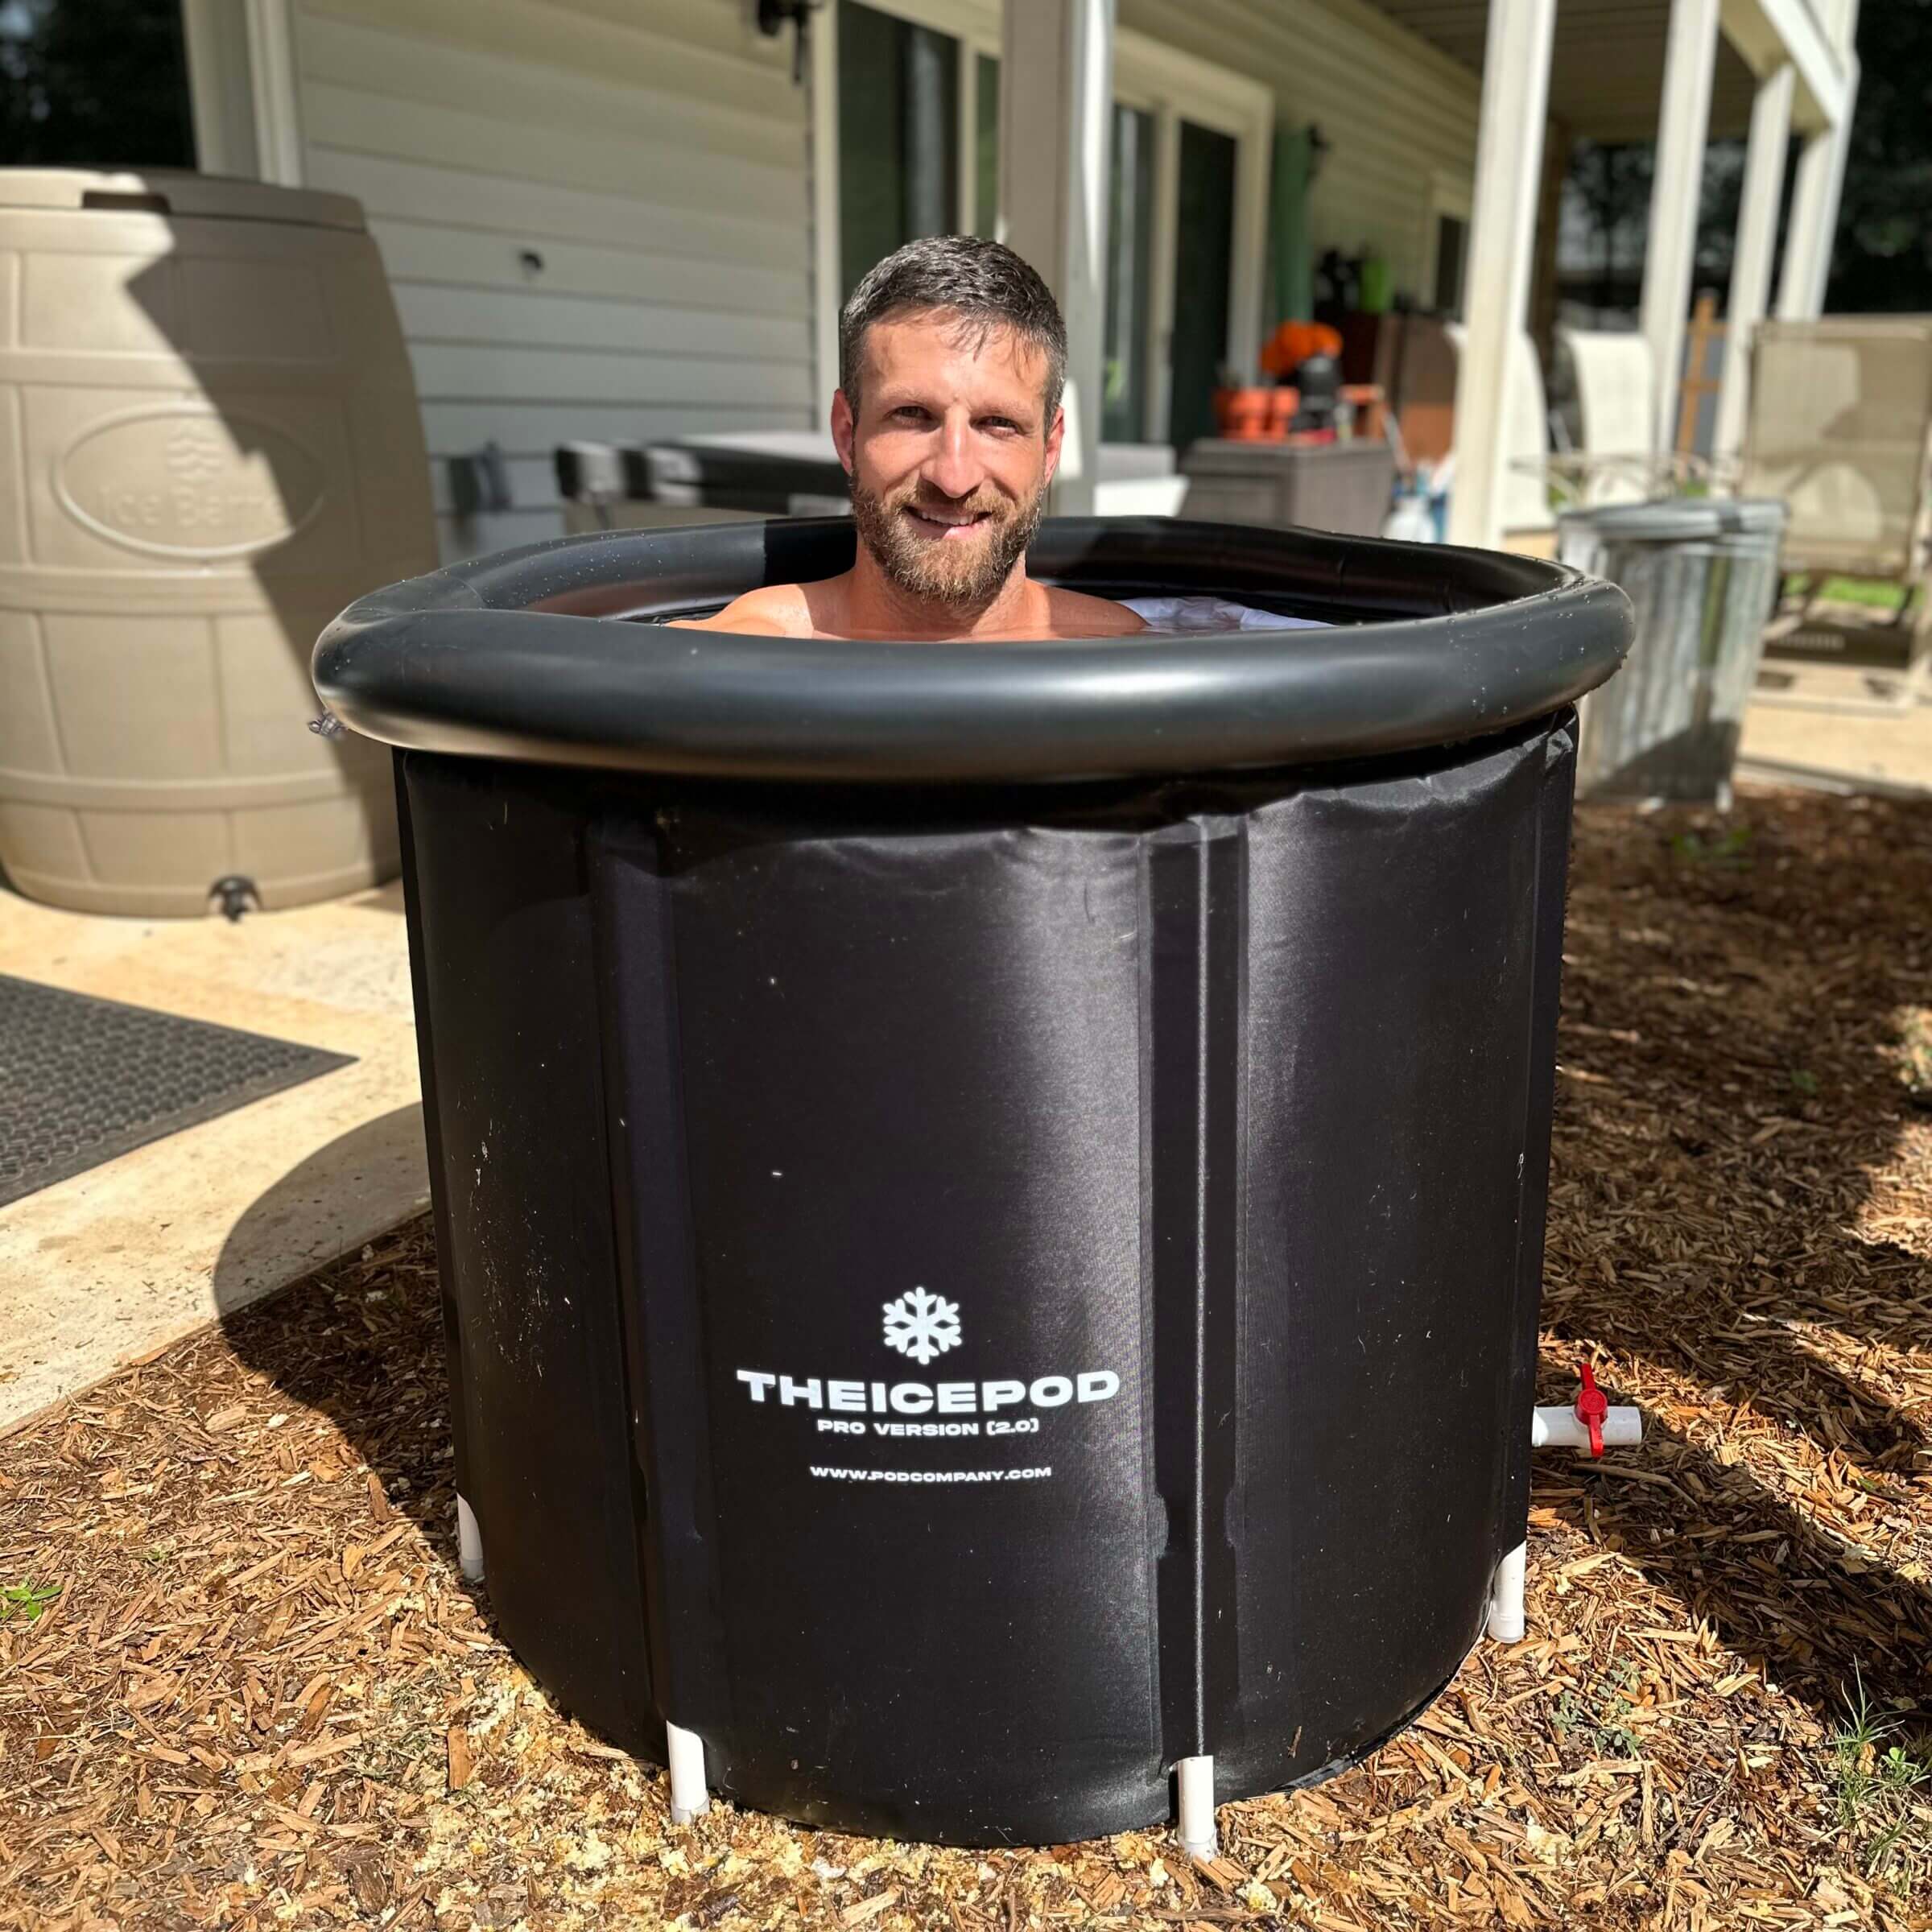 Most budget tubs lack insulation and won't keep the water cold for long.